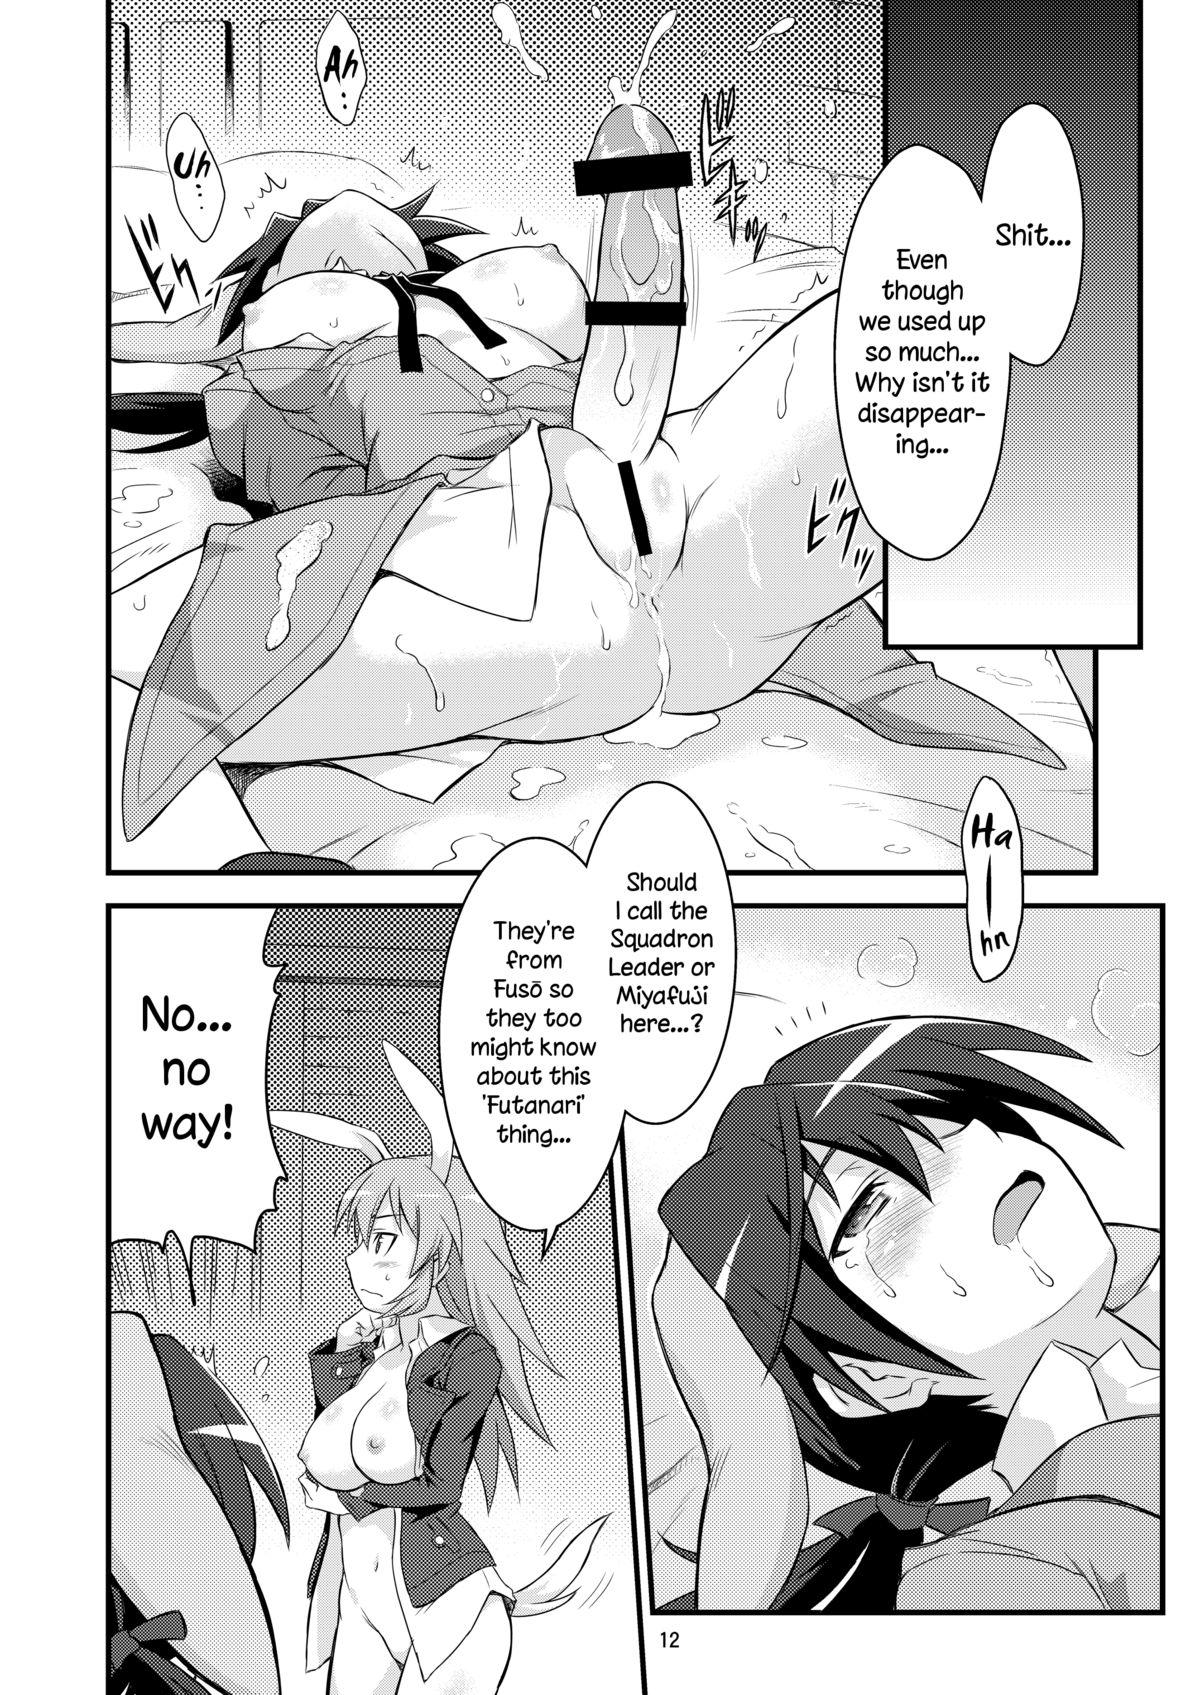 Threesome Shir and Gert in Big Trouble - Strike witches Flexible - Page 12